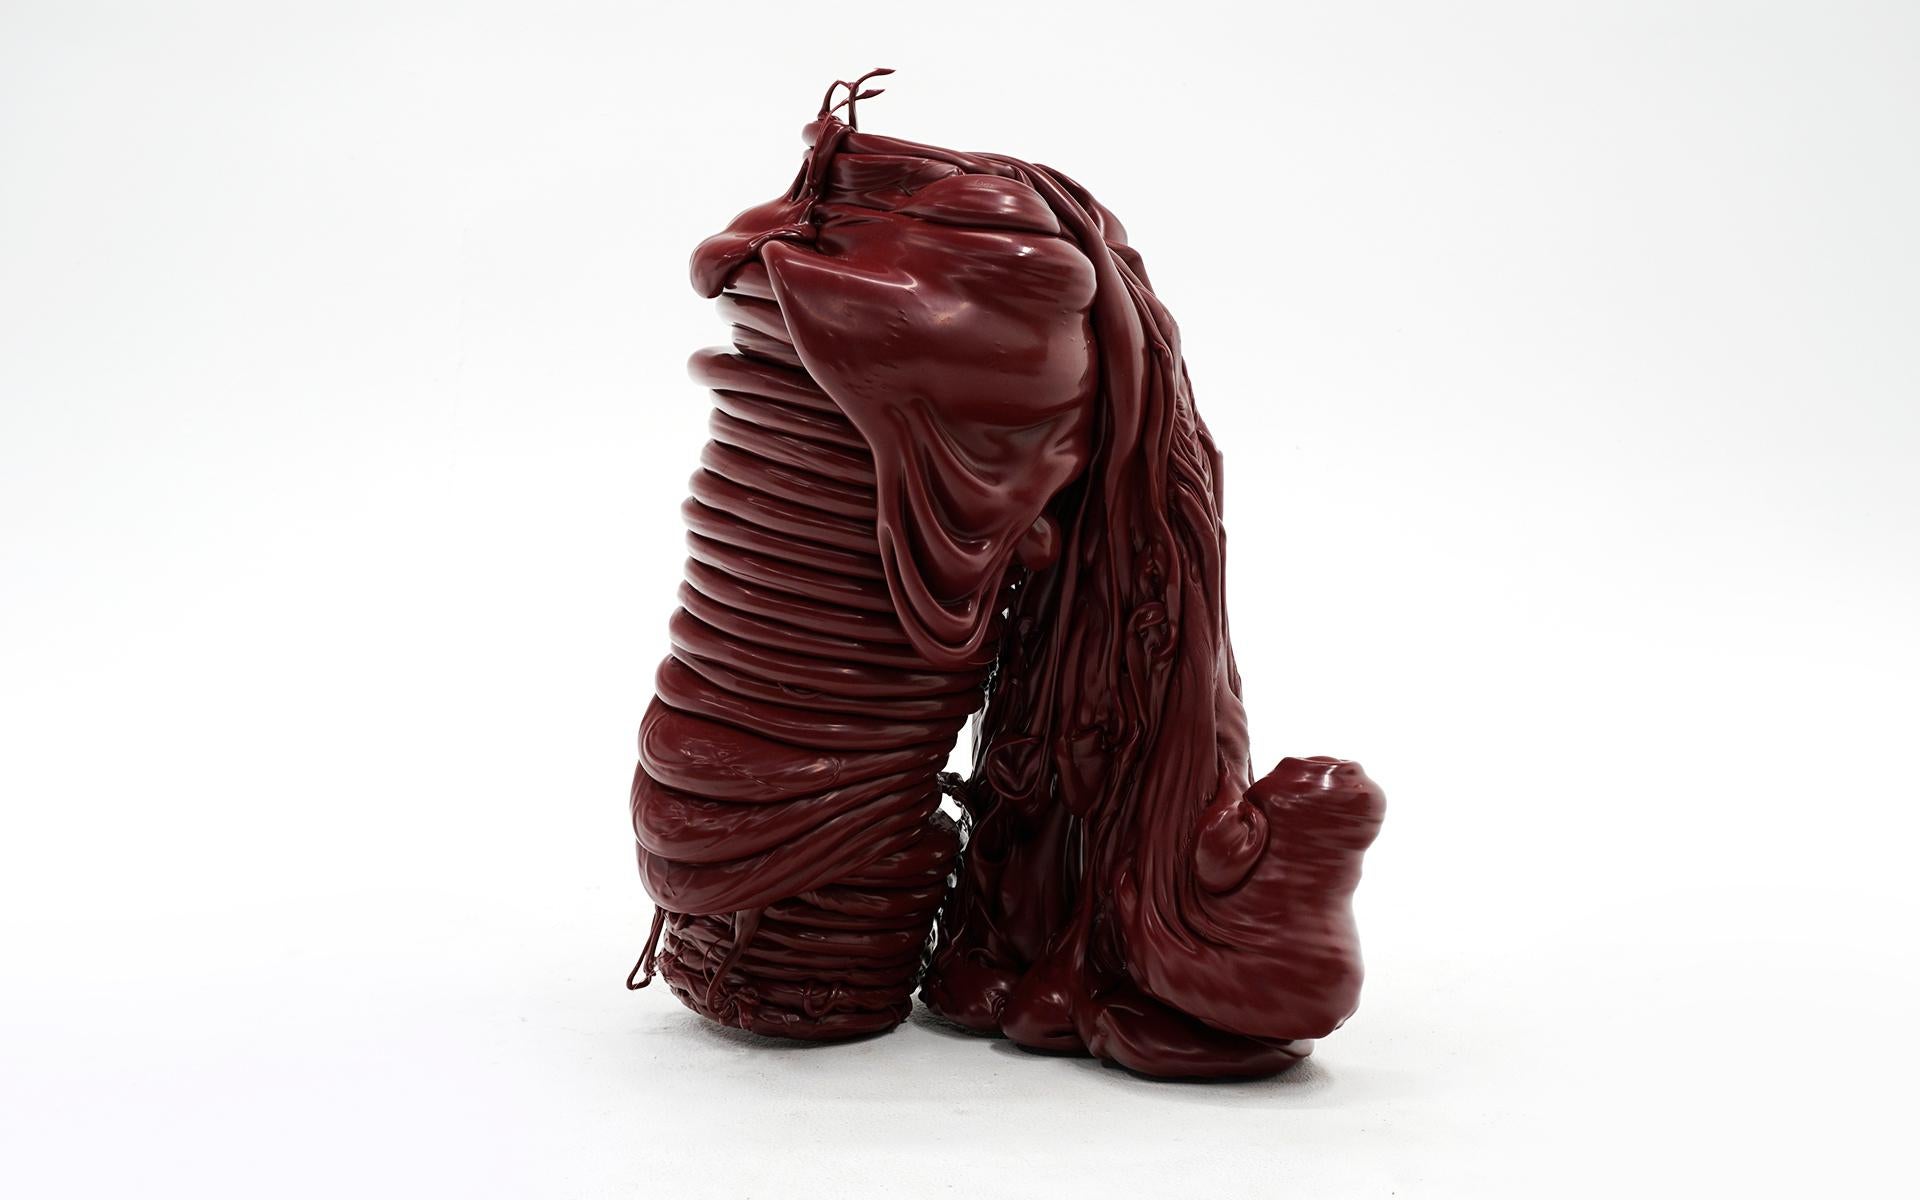 Modern Roxy Paine Scumak, 2011, Maroon / Burgundy Color, Mint Condition, Signed For Sale